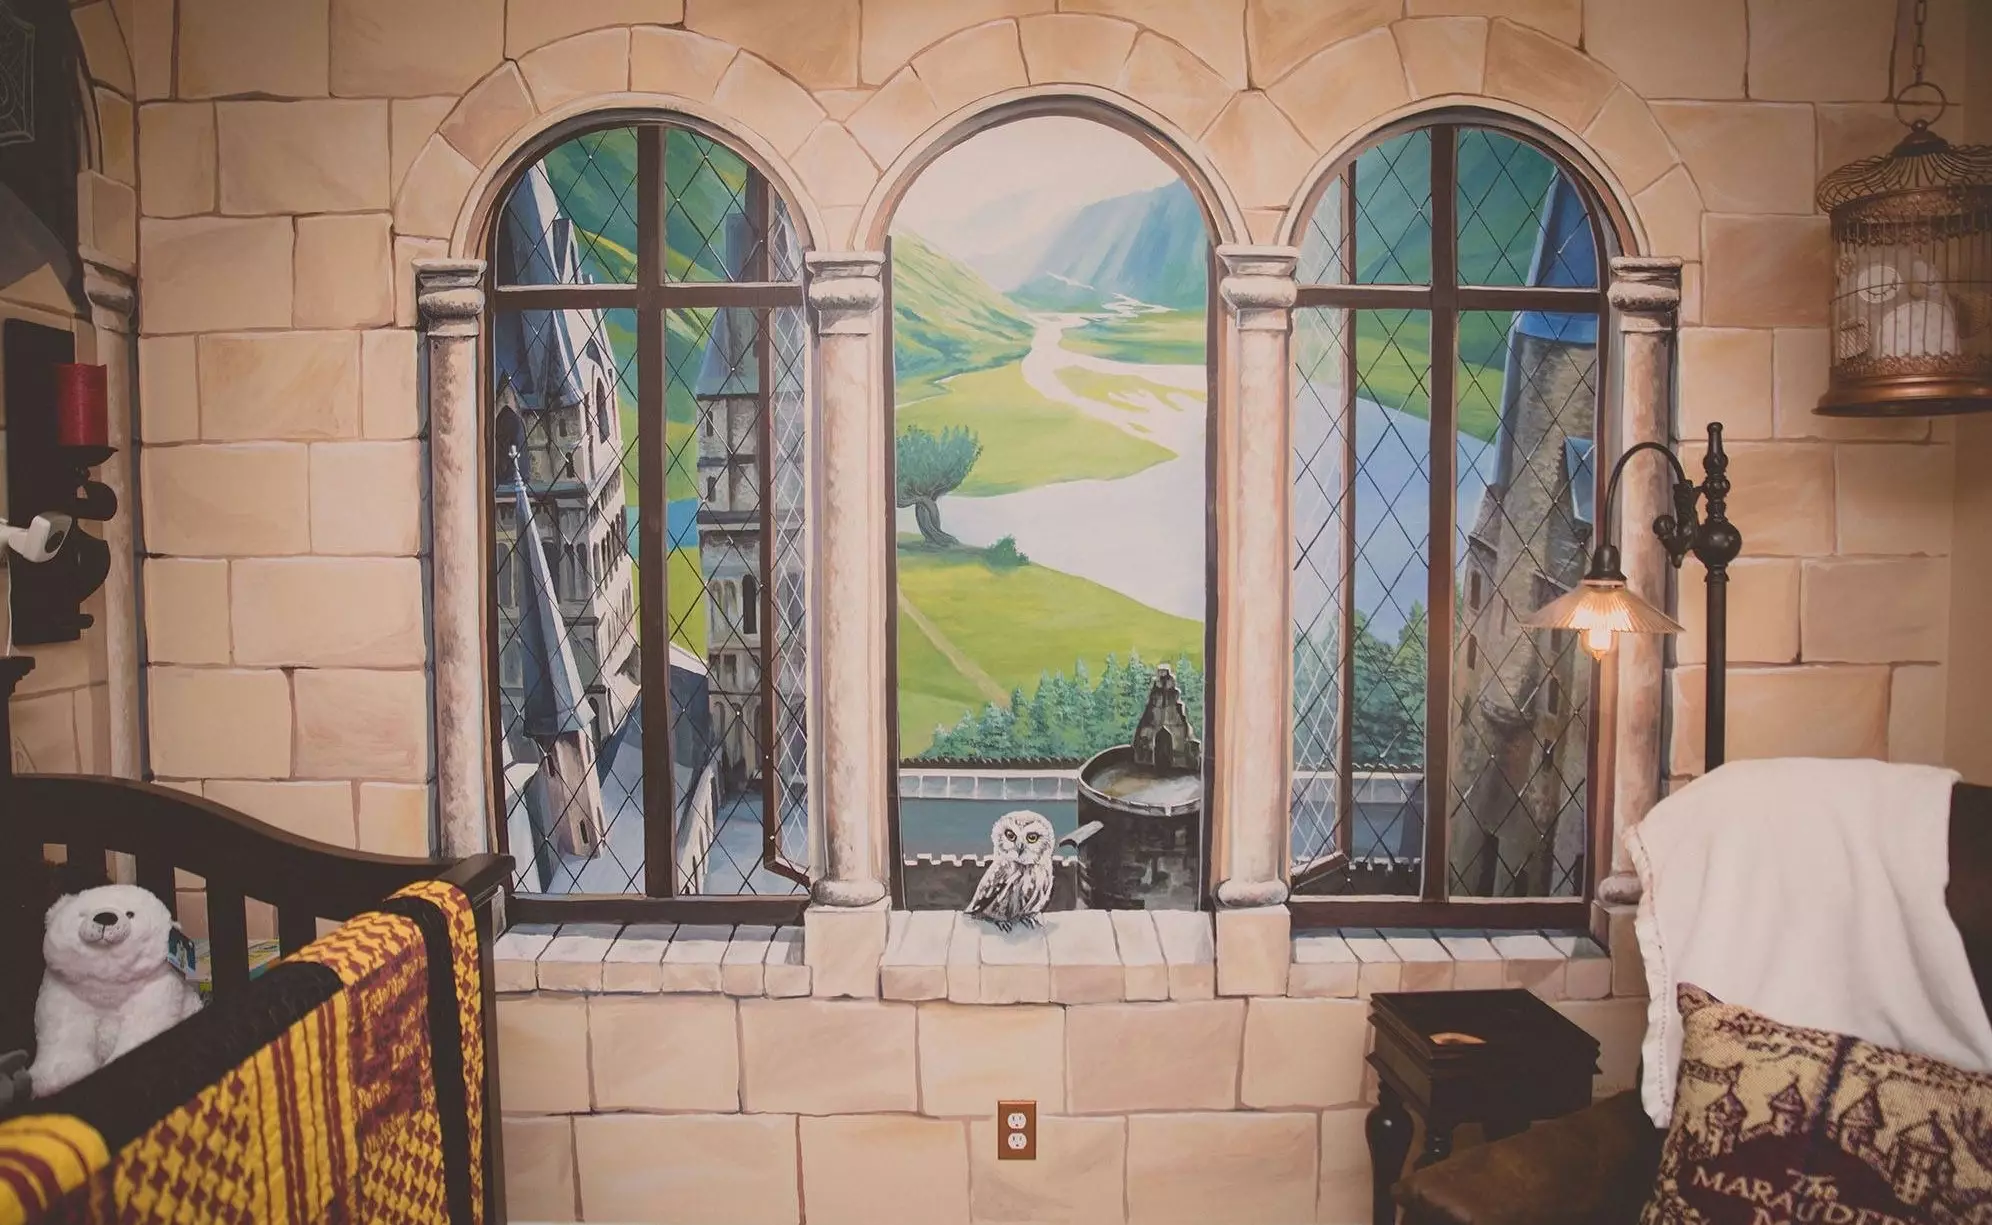 The mural by Nate Branowski brings the room to life (